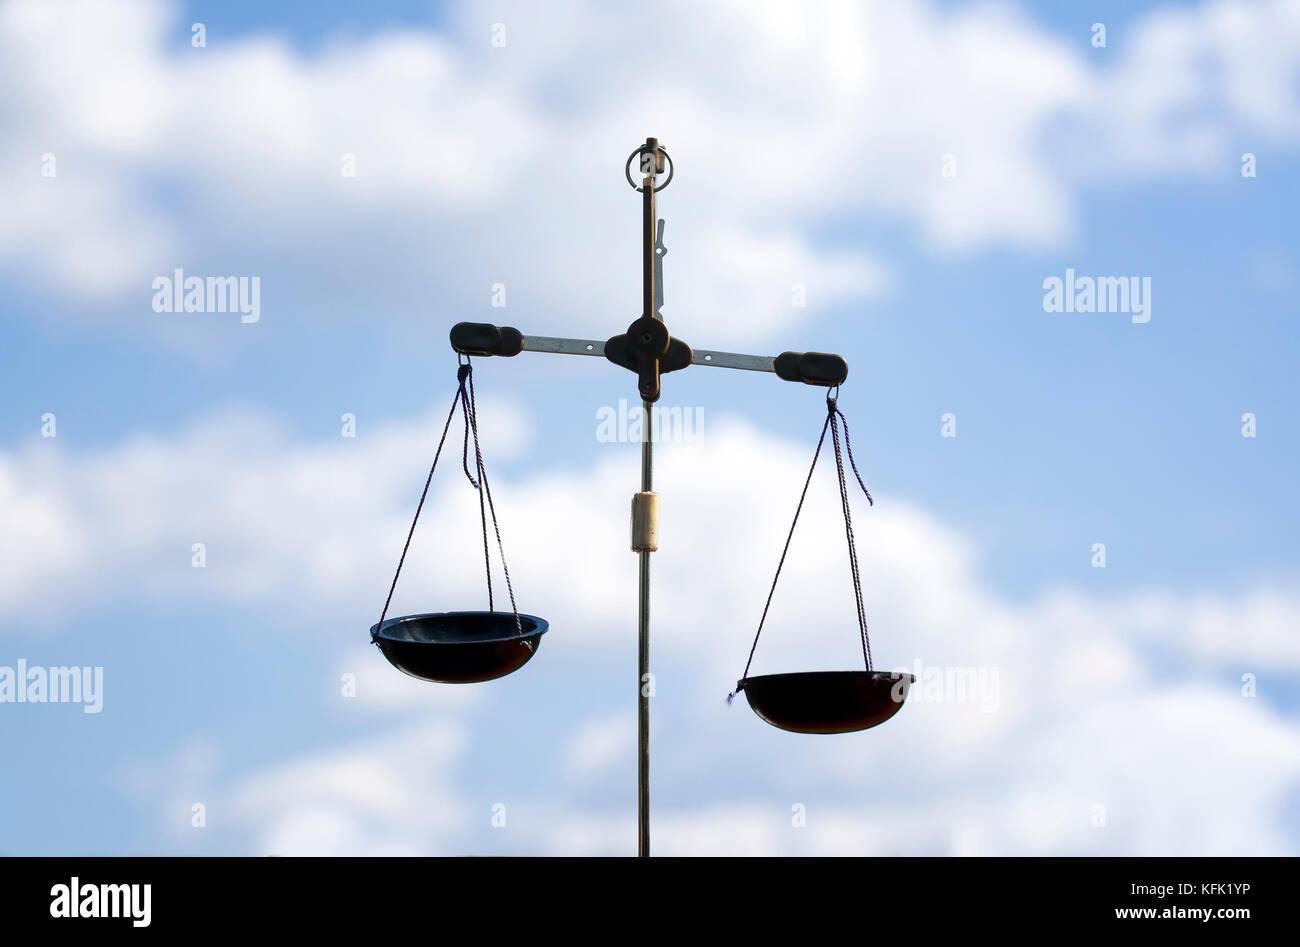 two scales hanging on blue sky background Stock Photo